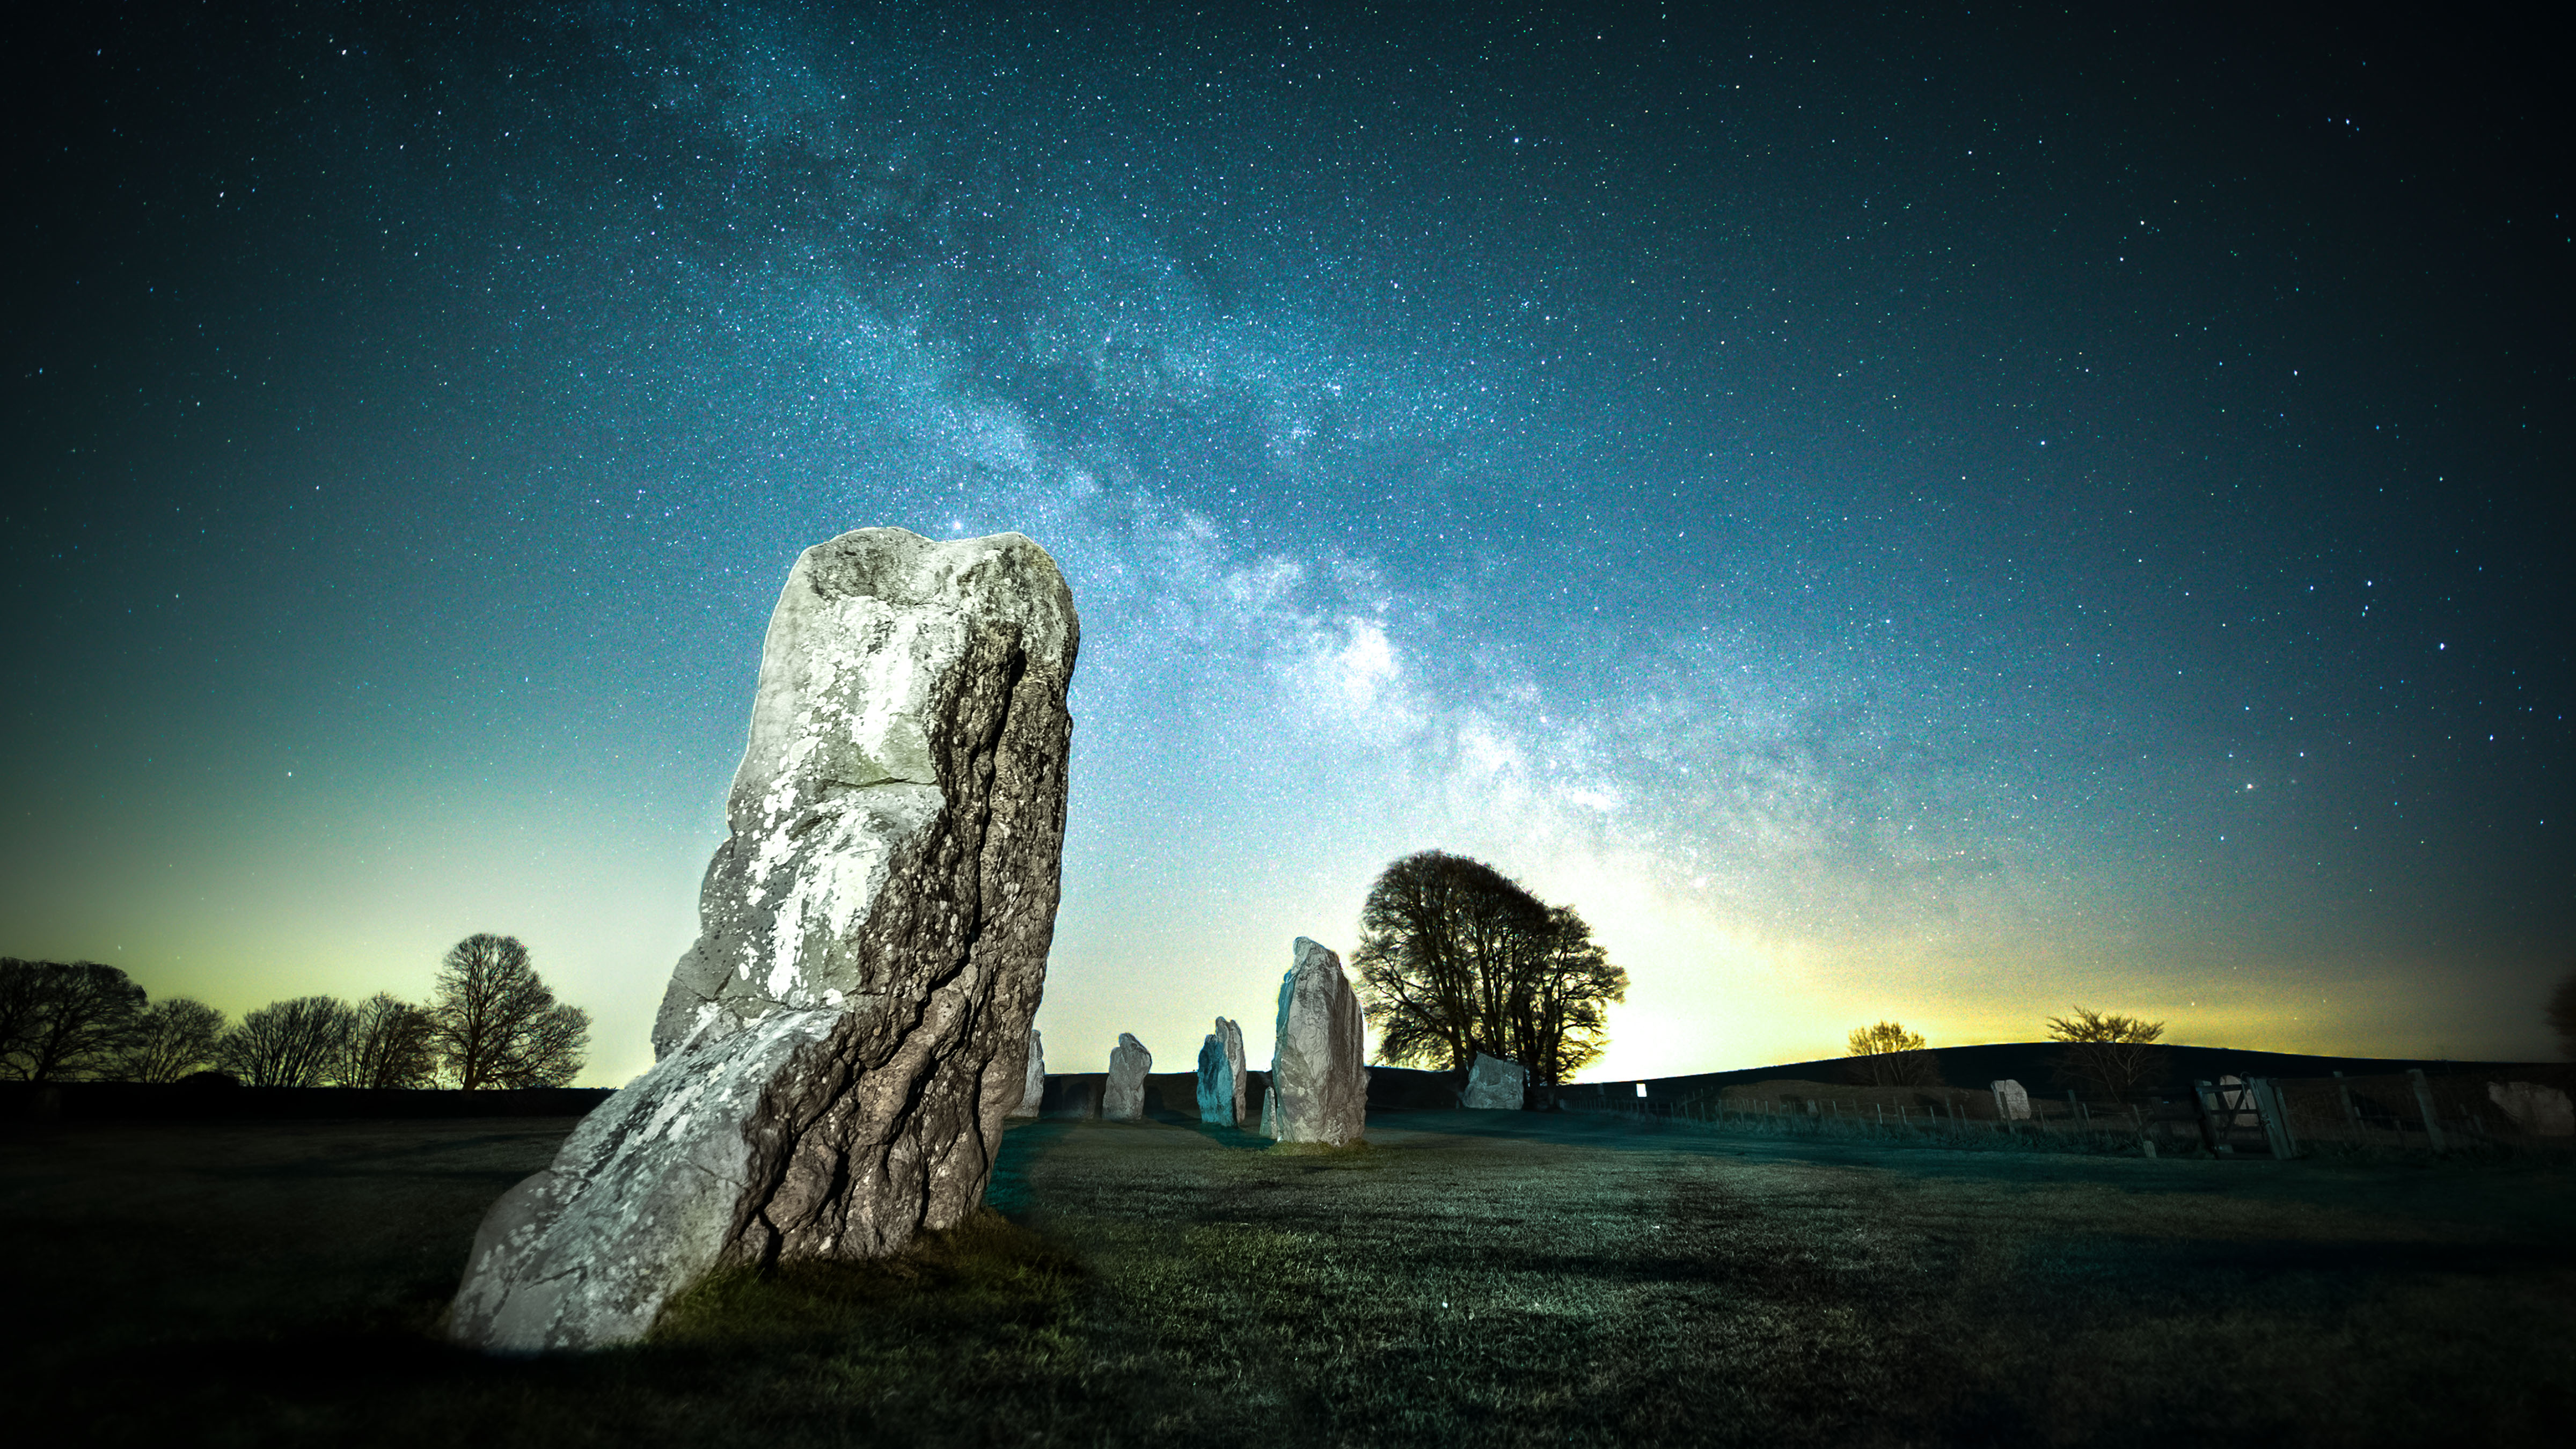 a large stone from a stone circle stands in the foreground. other stones dot the background, along with a large tree. light pollution shines in the sky along with the milky way